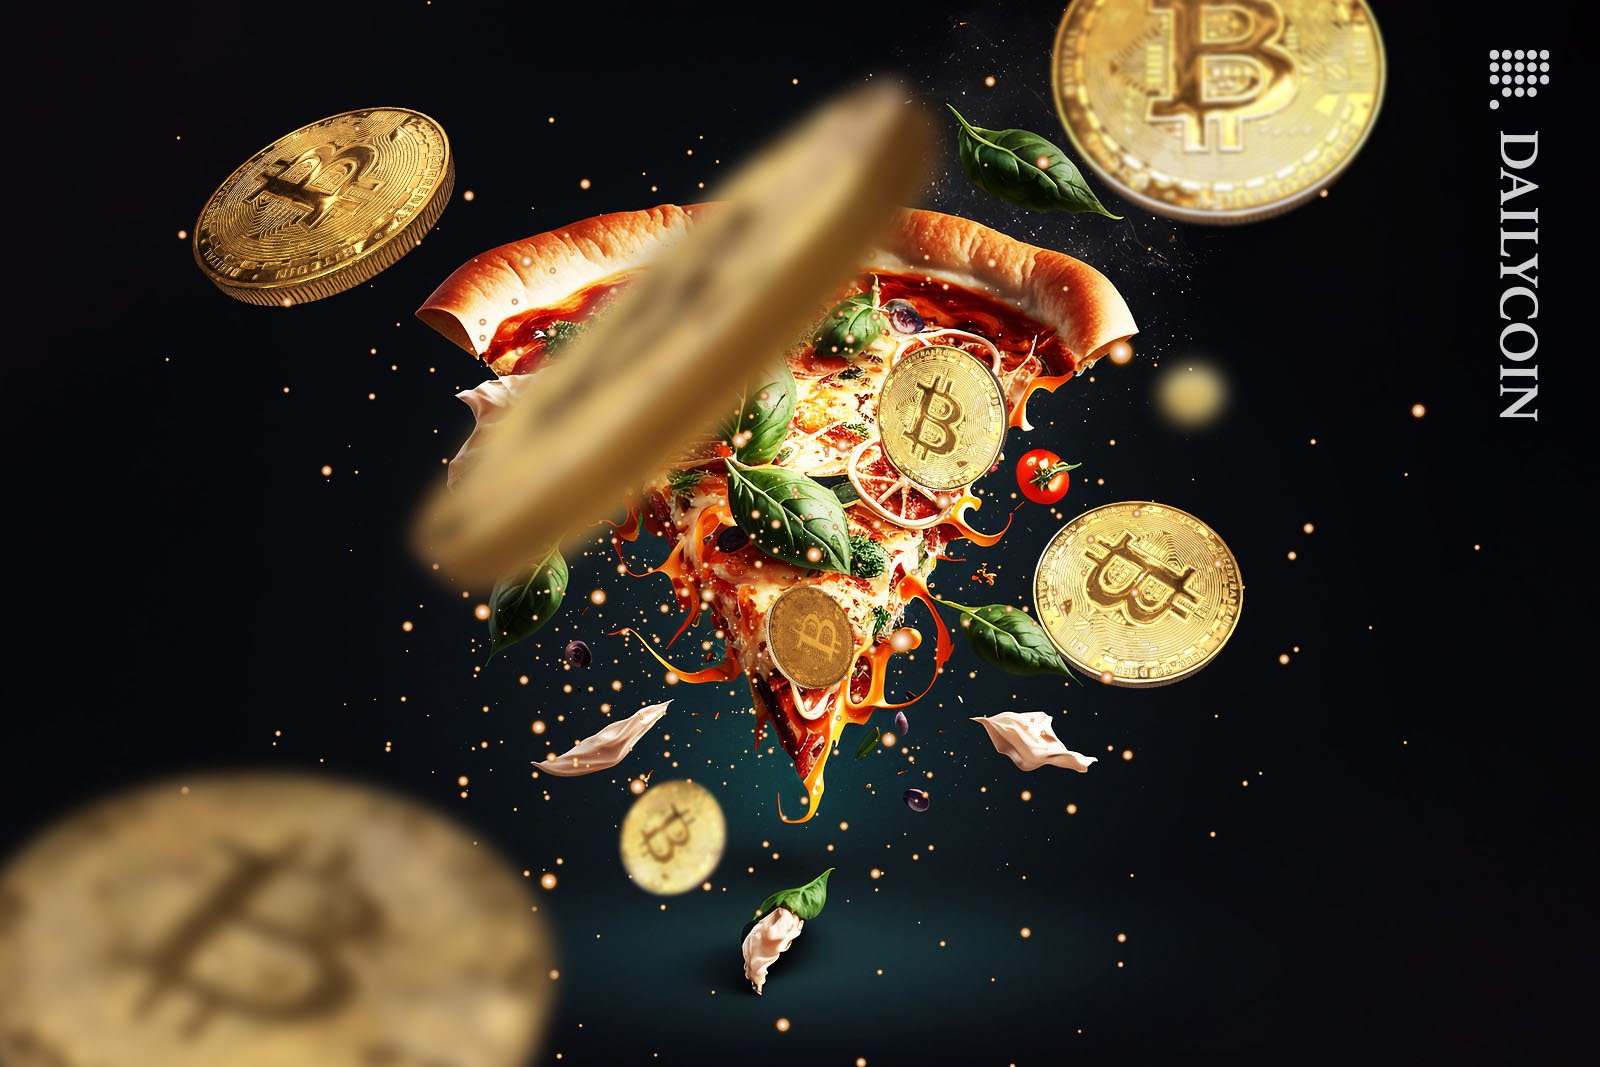 Slice of pizza exploding into ingrediends and bitcoins.